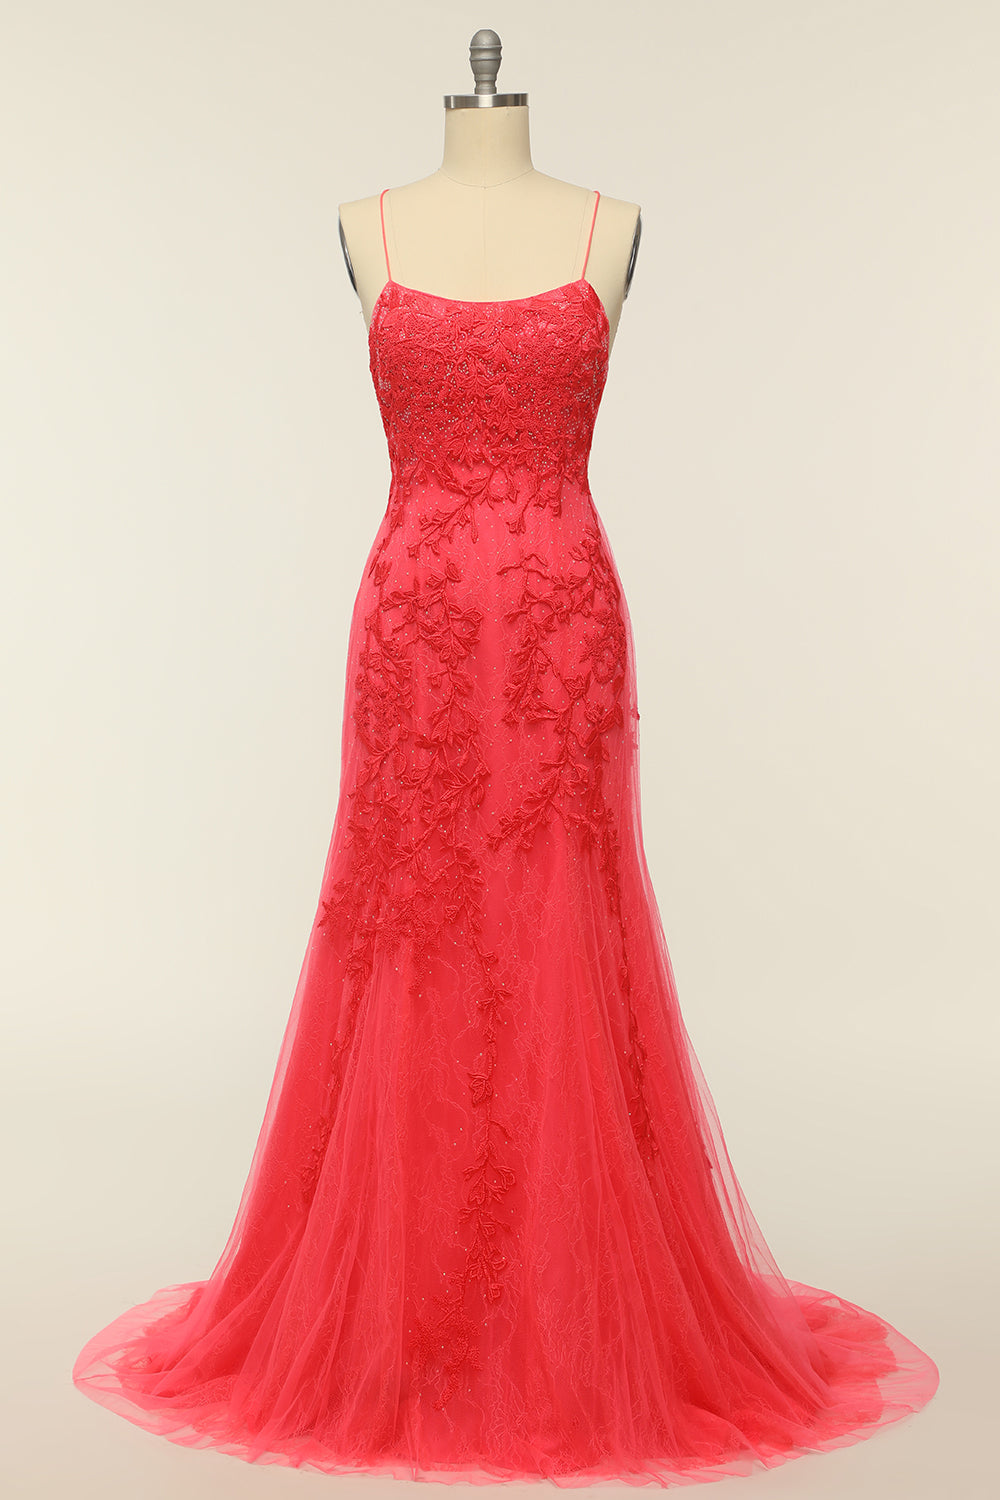 Party Dress Australian, Coral Backless Long Prom Dress with Appliques